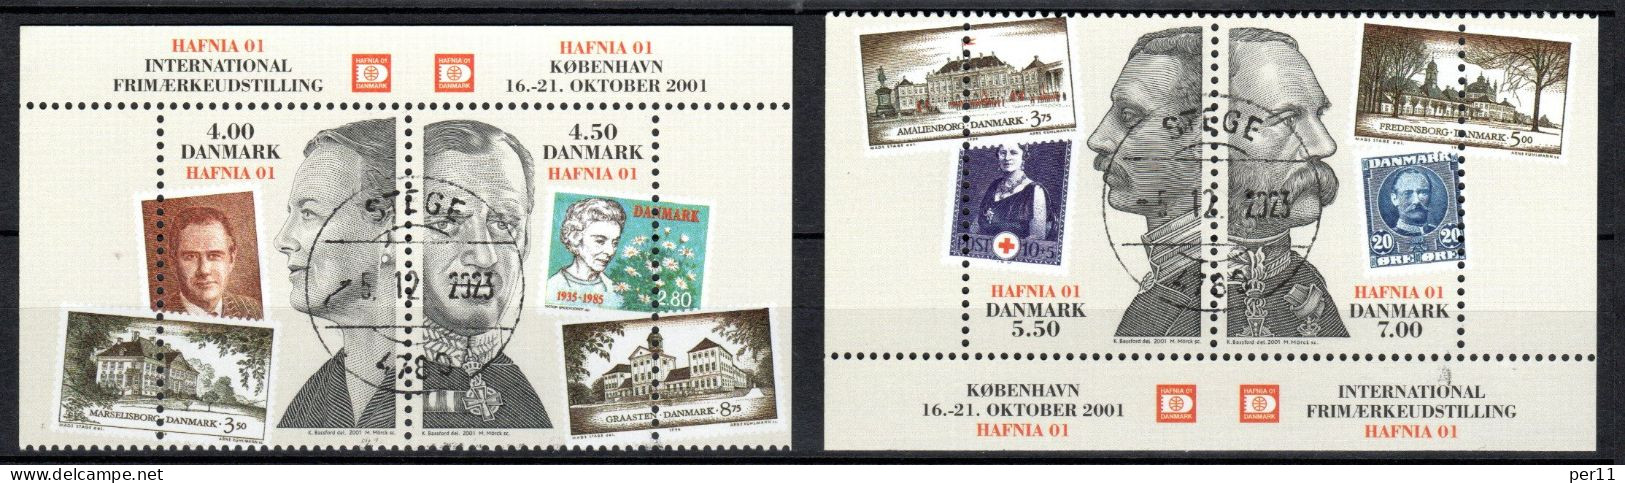 2001 Hafnia01 Stamp Excibition  (bl10) - Used Stamps